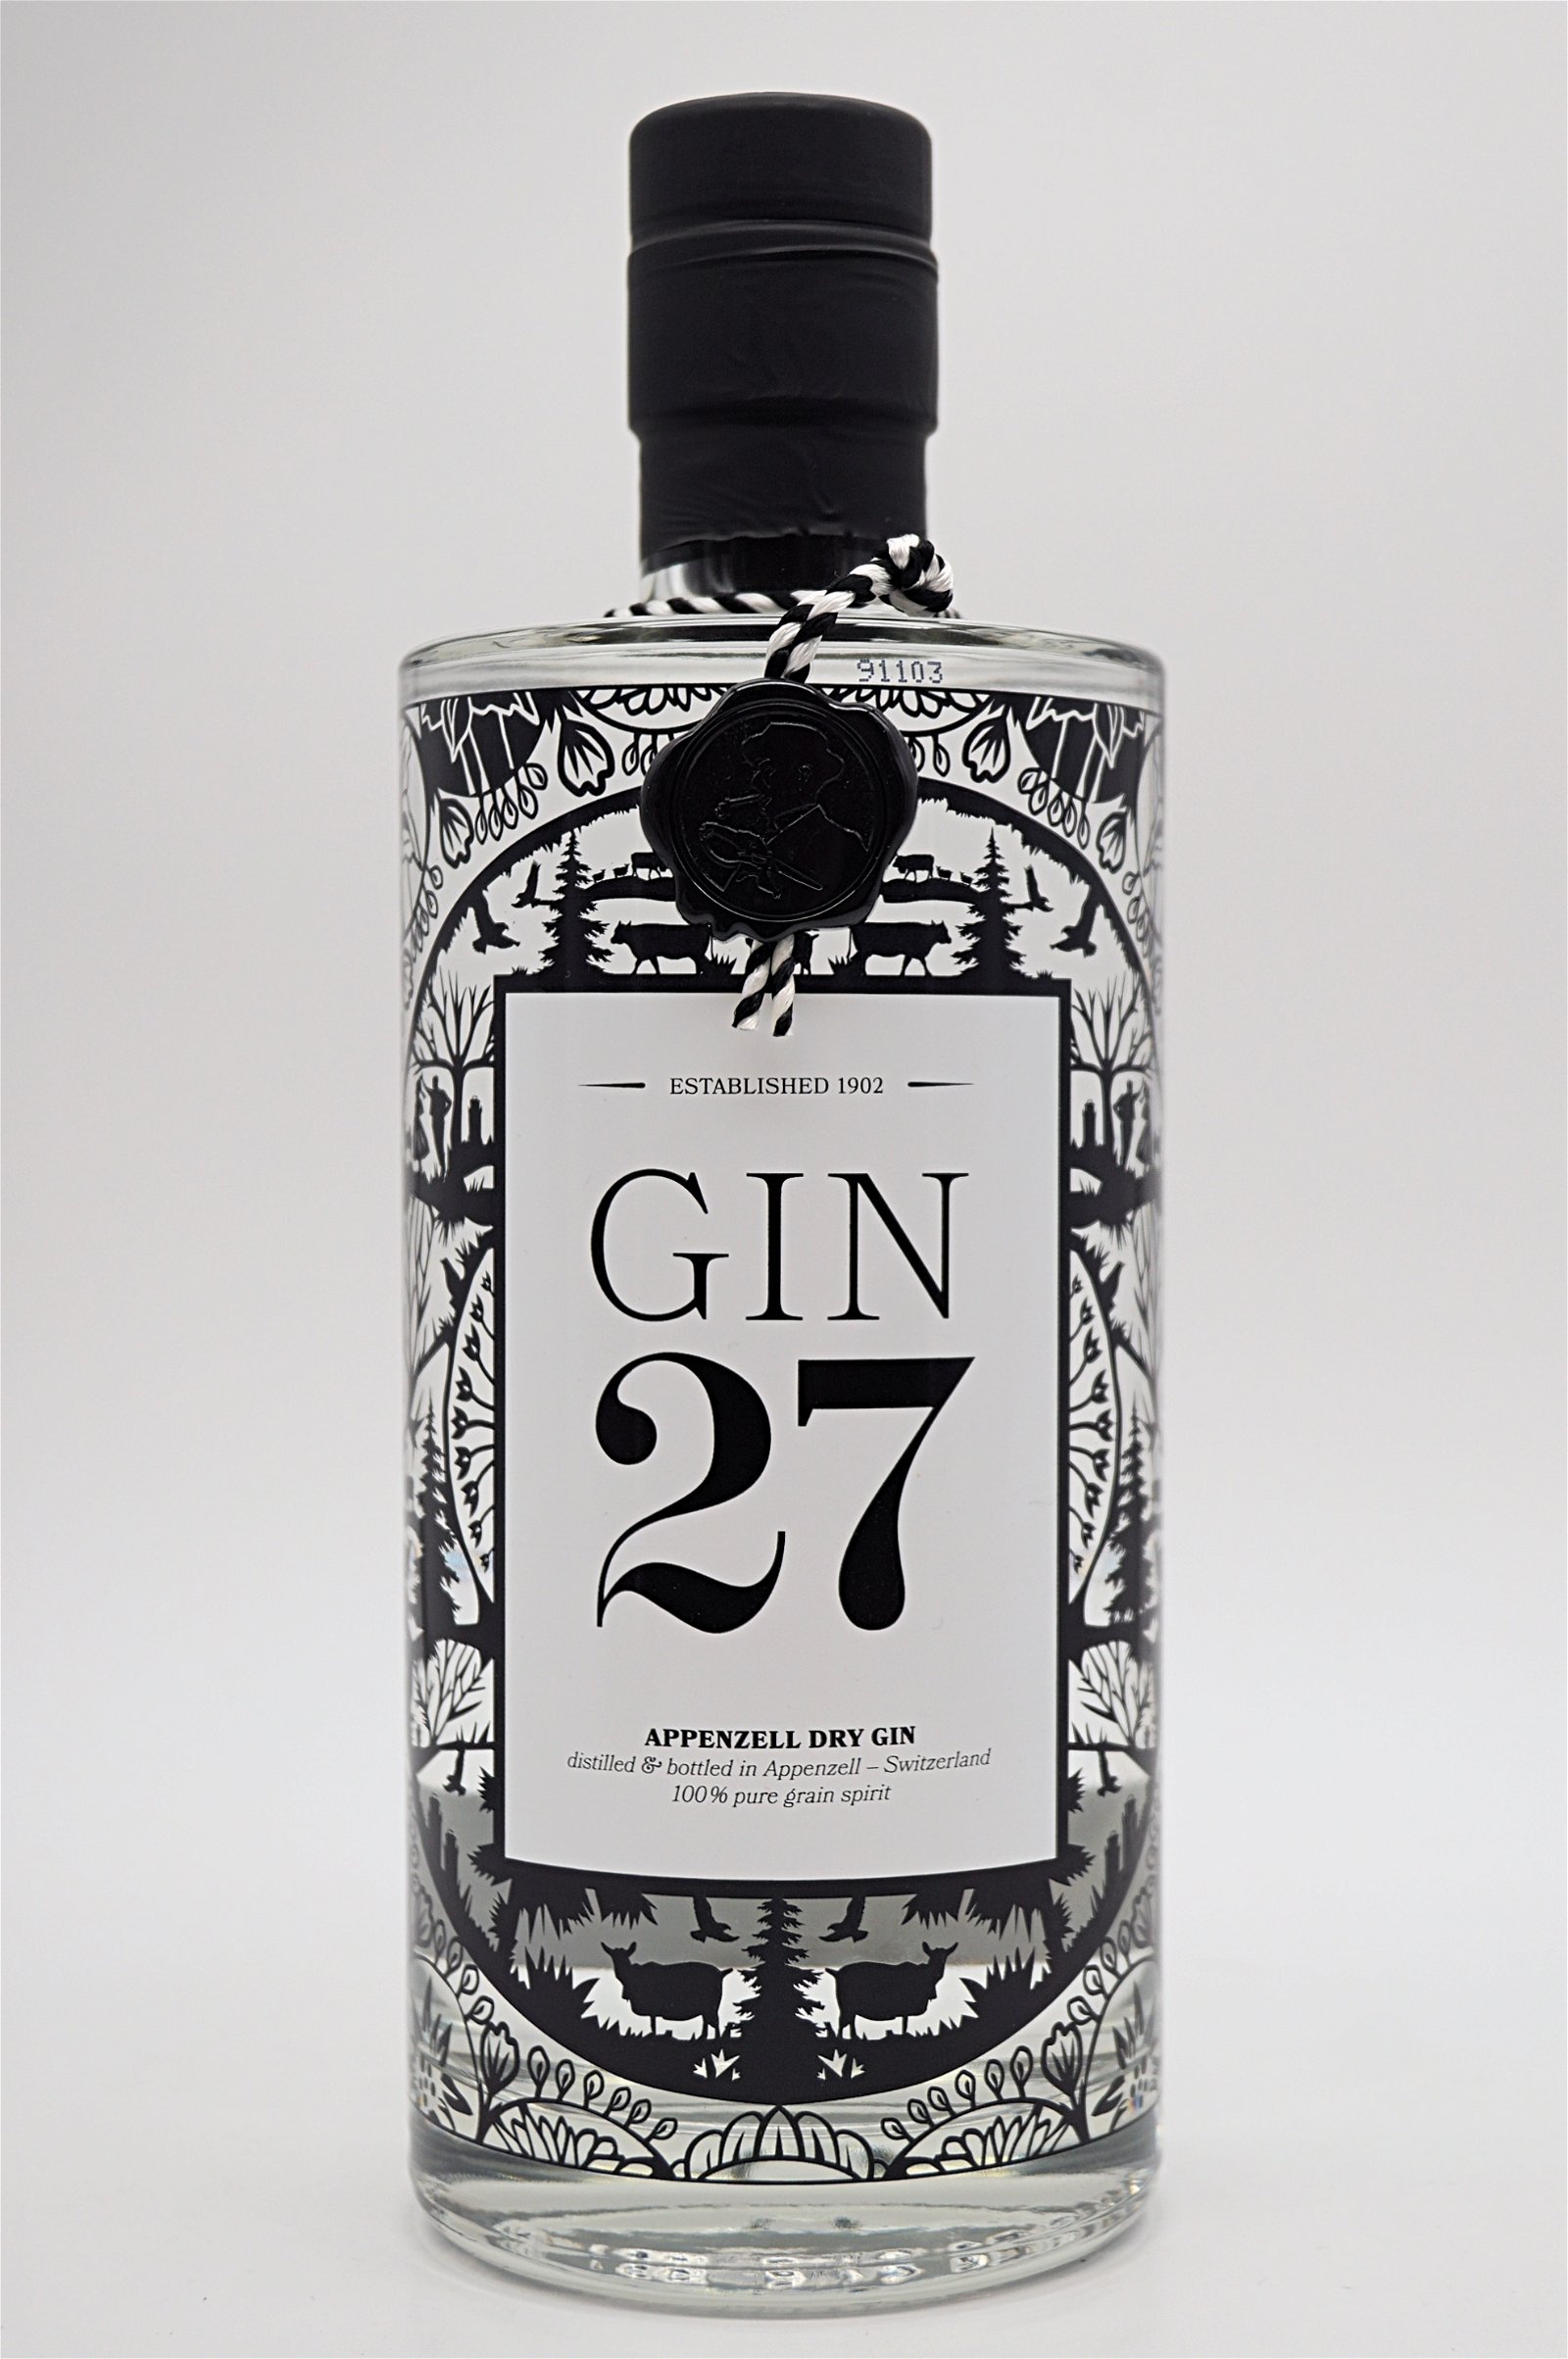 Gin 27 Appenzell Dry Gin